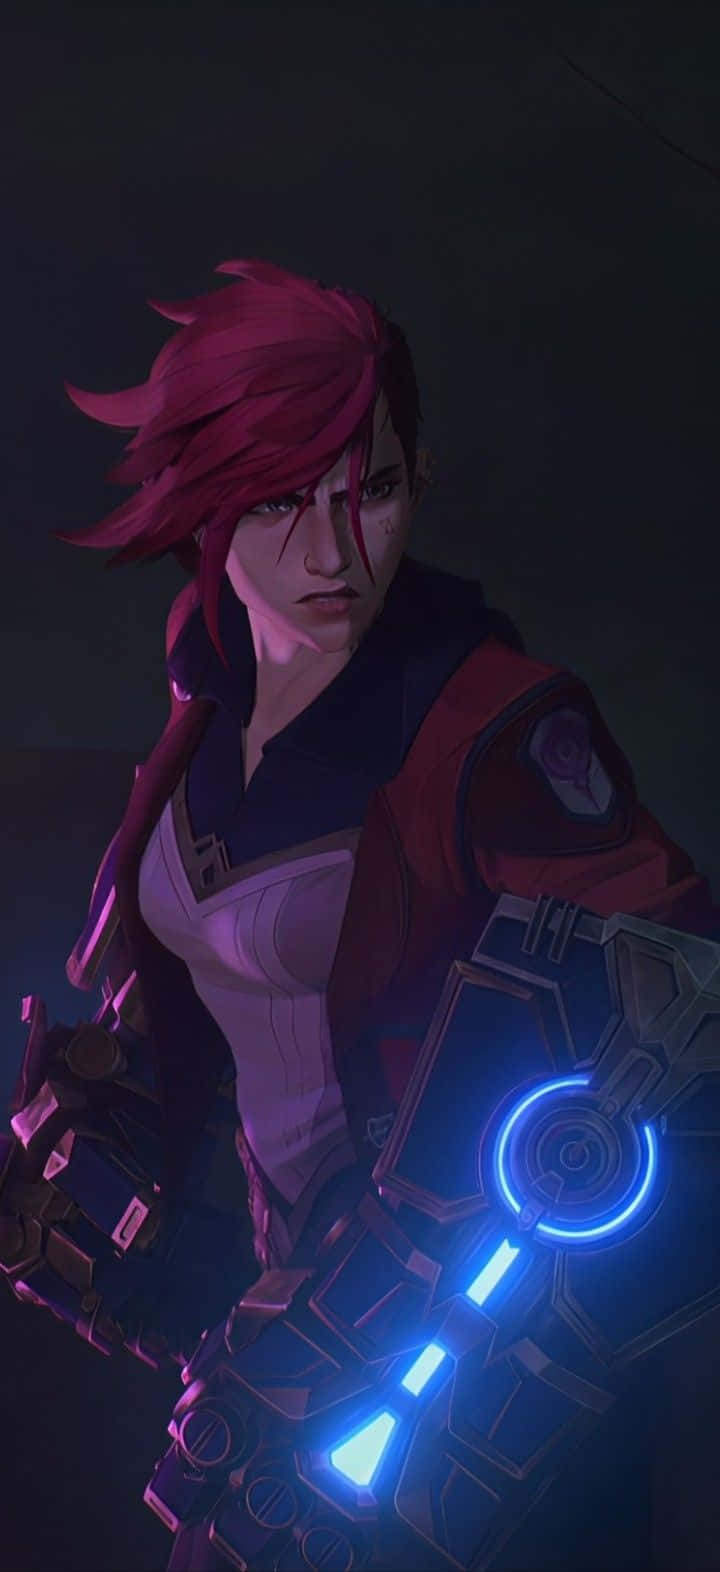 A Female Character With Red Hair And Blue Lights Wallpaper